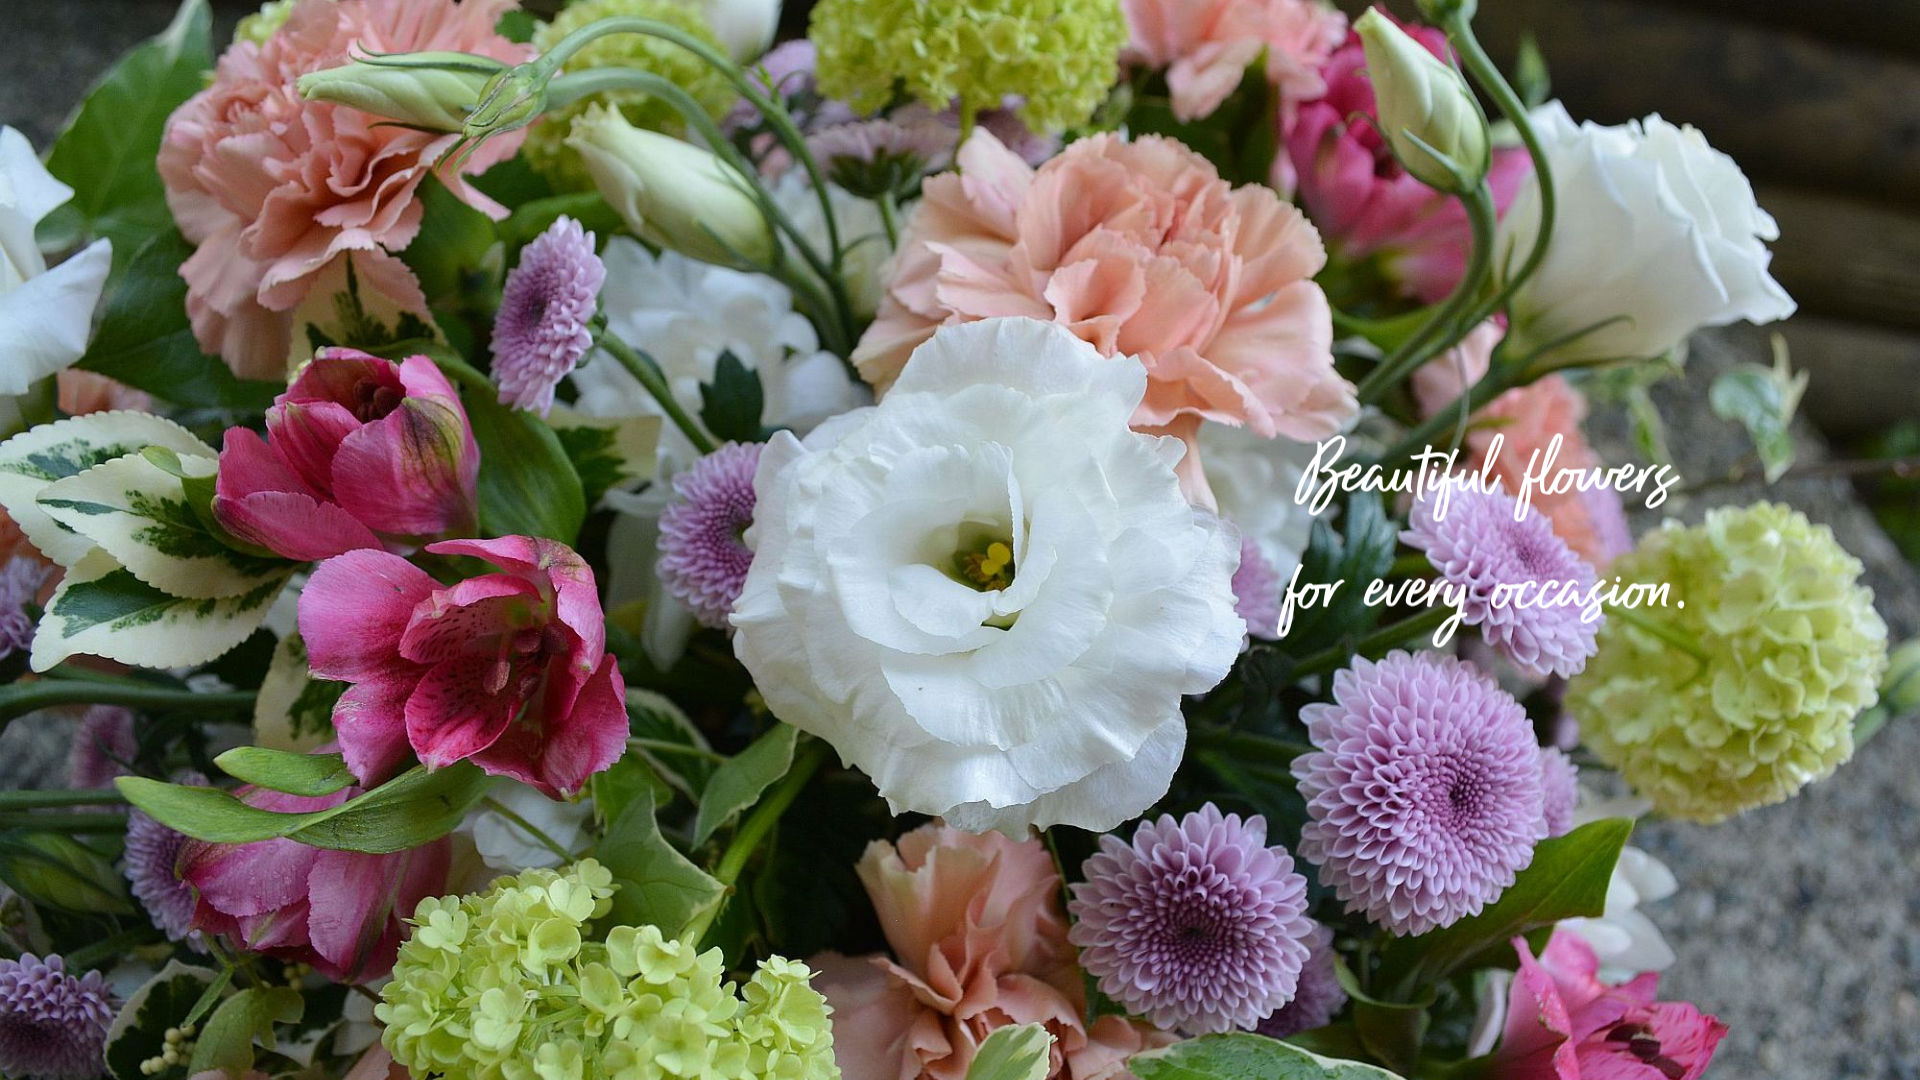 beautiful flowers for every occasion-home page(3)